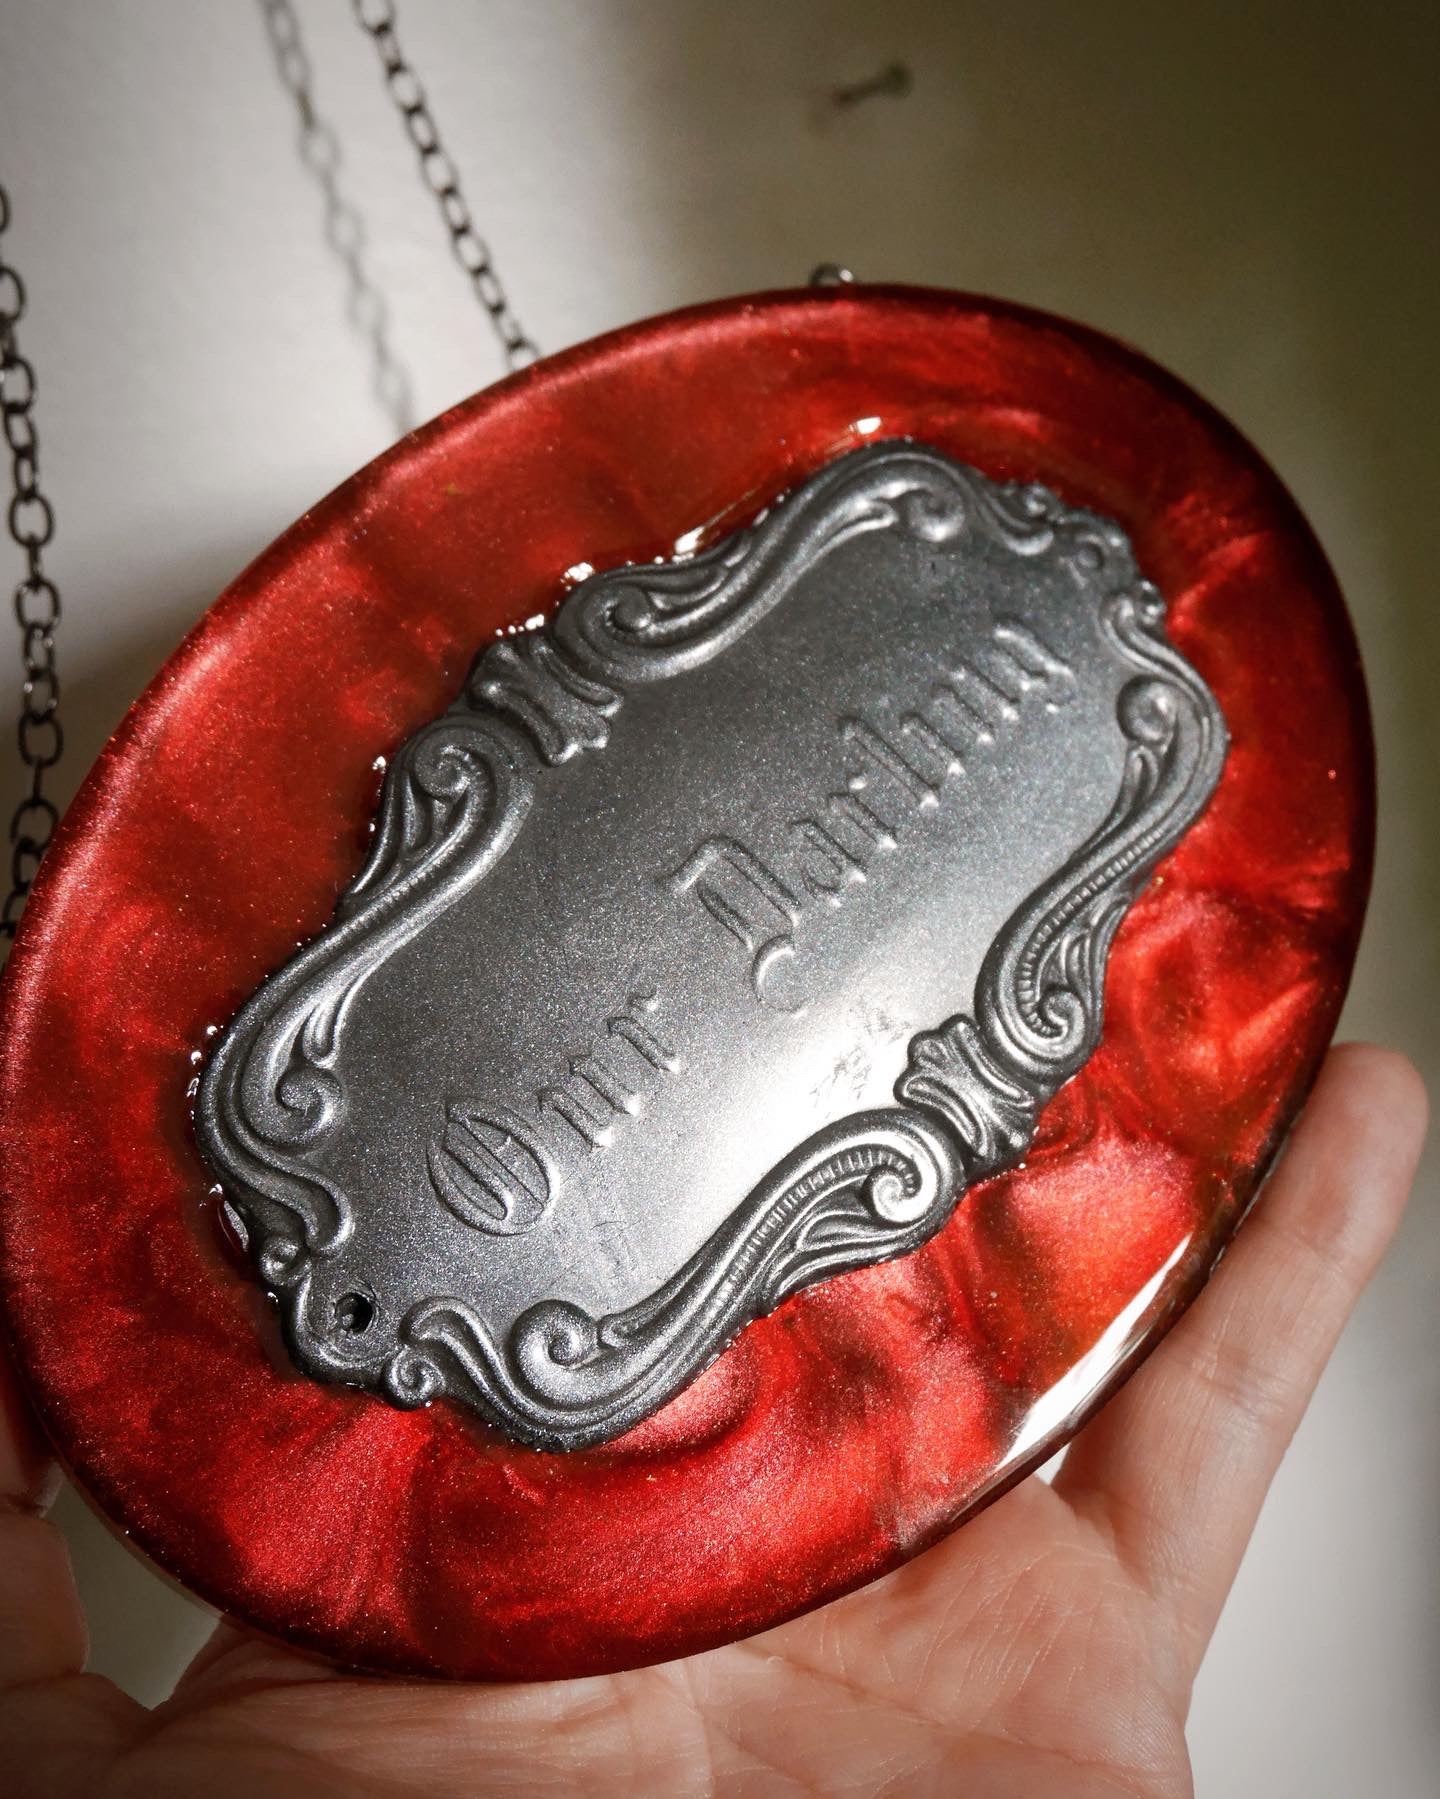 Darling Victorian Mourning Casket Plaque - Red and Pewter